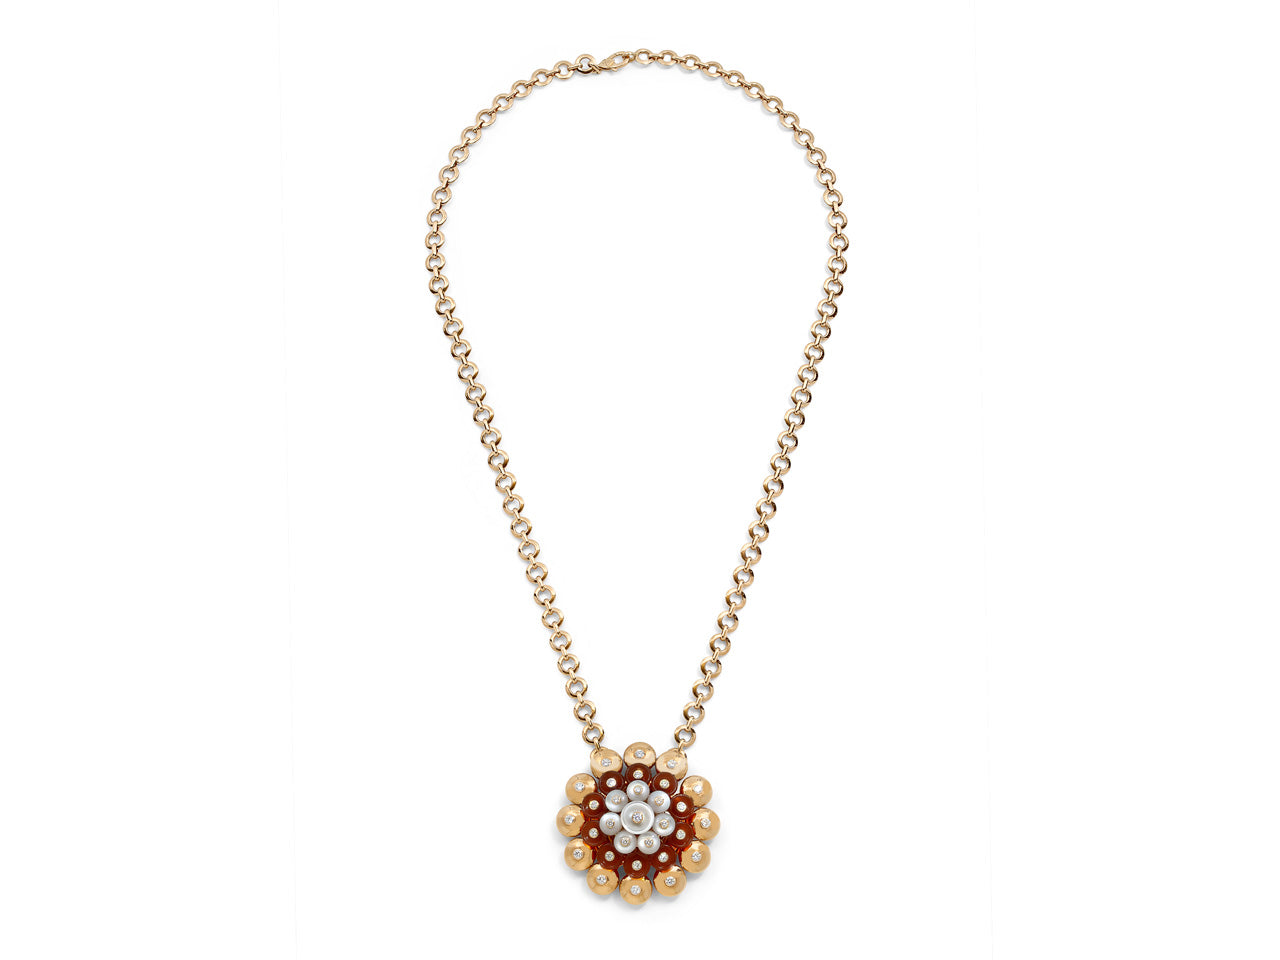 Van Cleef & Arpels 'Bouton d'or' Carnelian, Mother-of-Pearl and Diamond Pendant in 18K Rose Gold